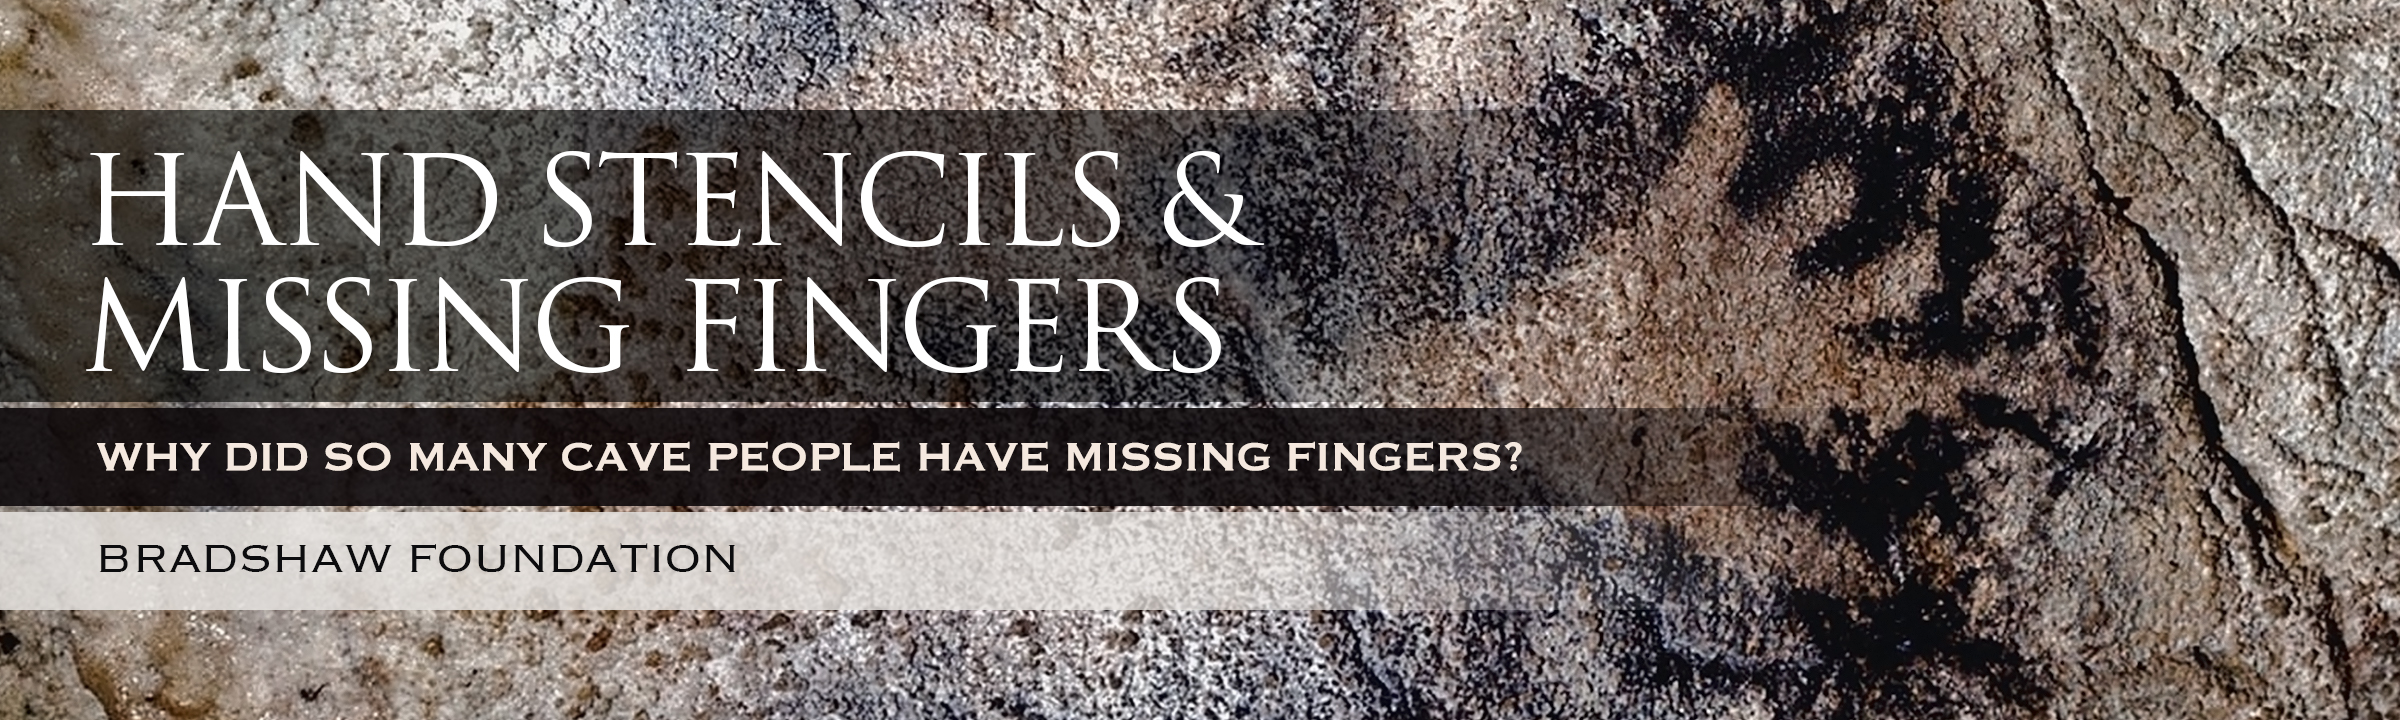 Hand stencils and their missing fingers Cave Art Archaeology